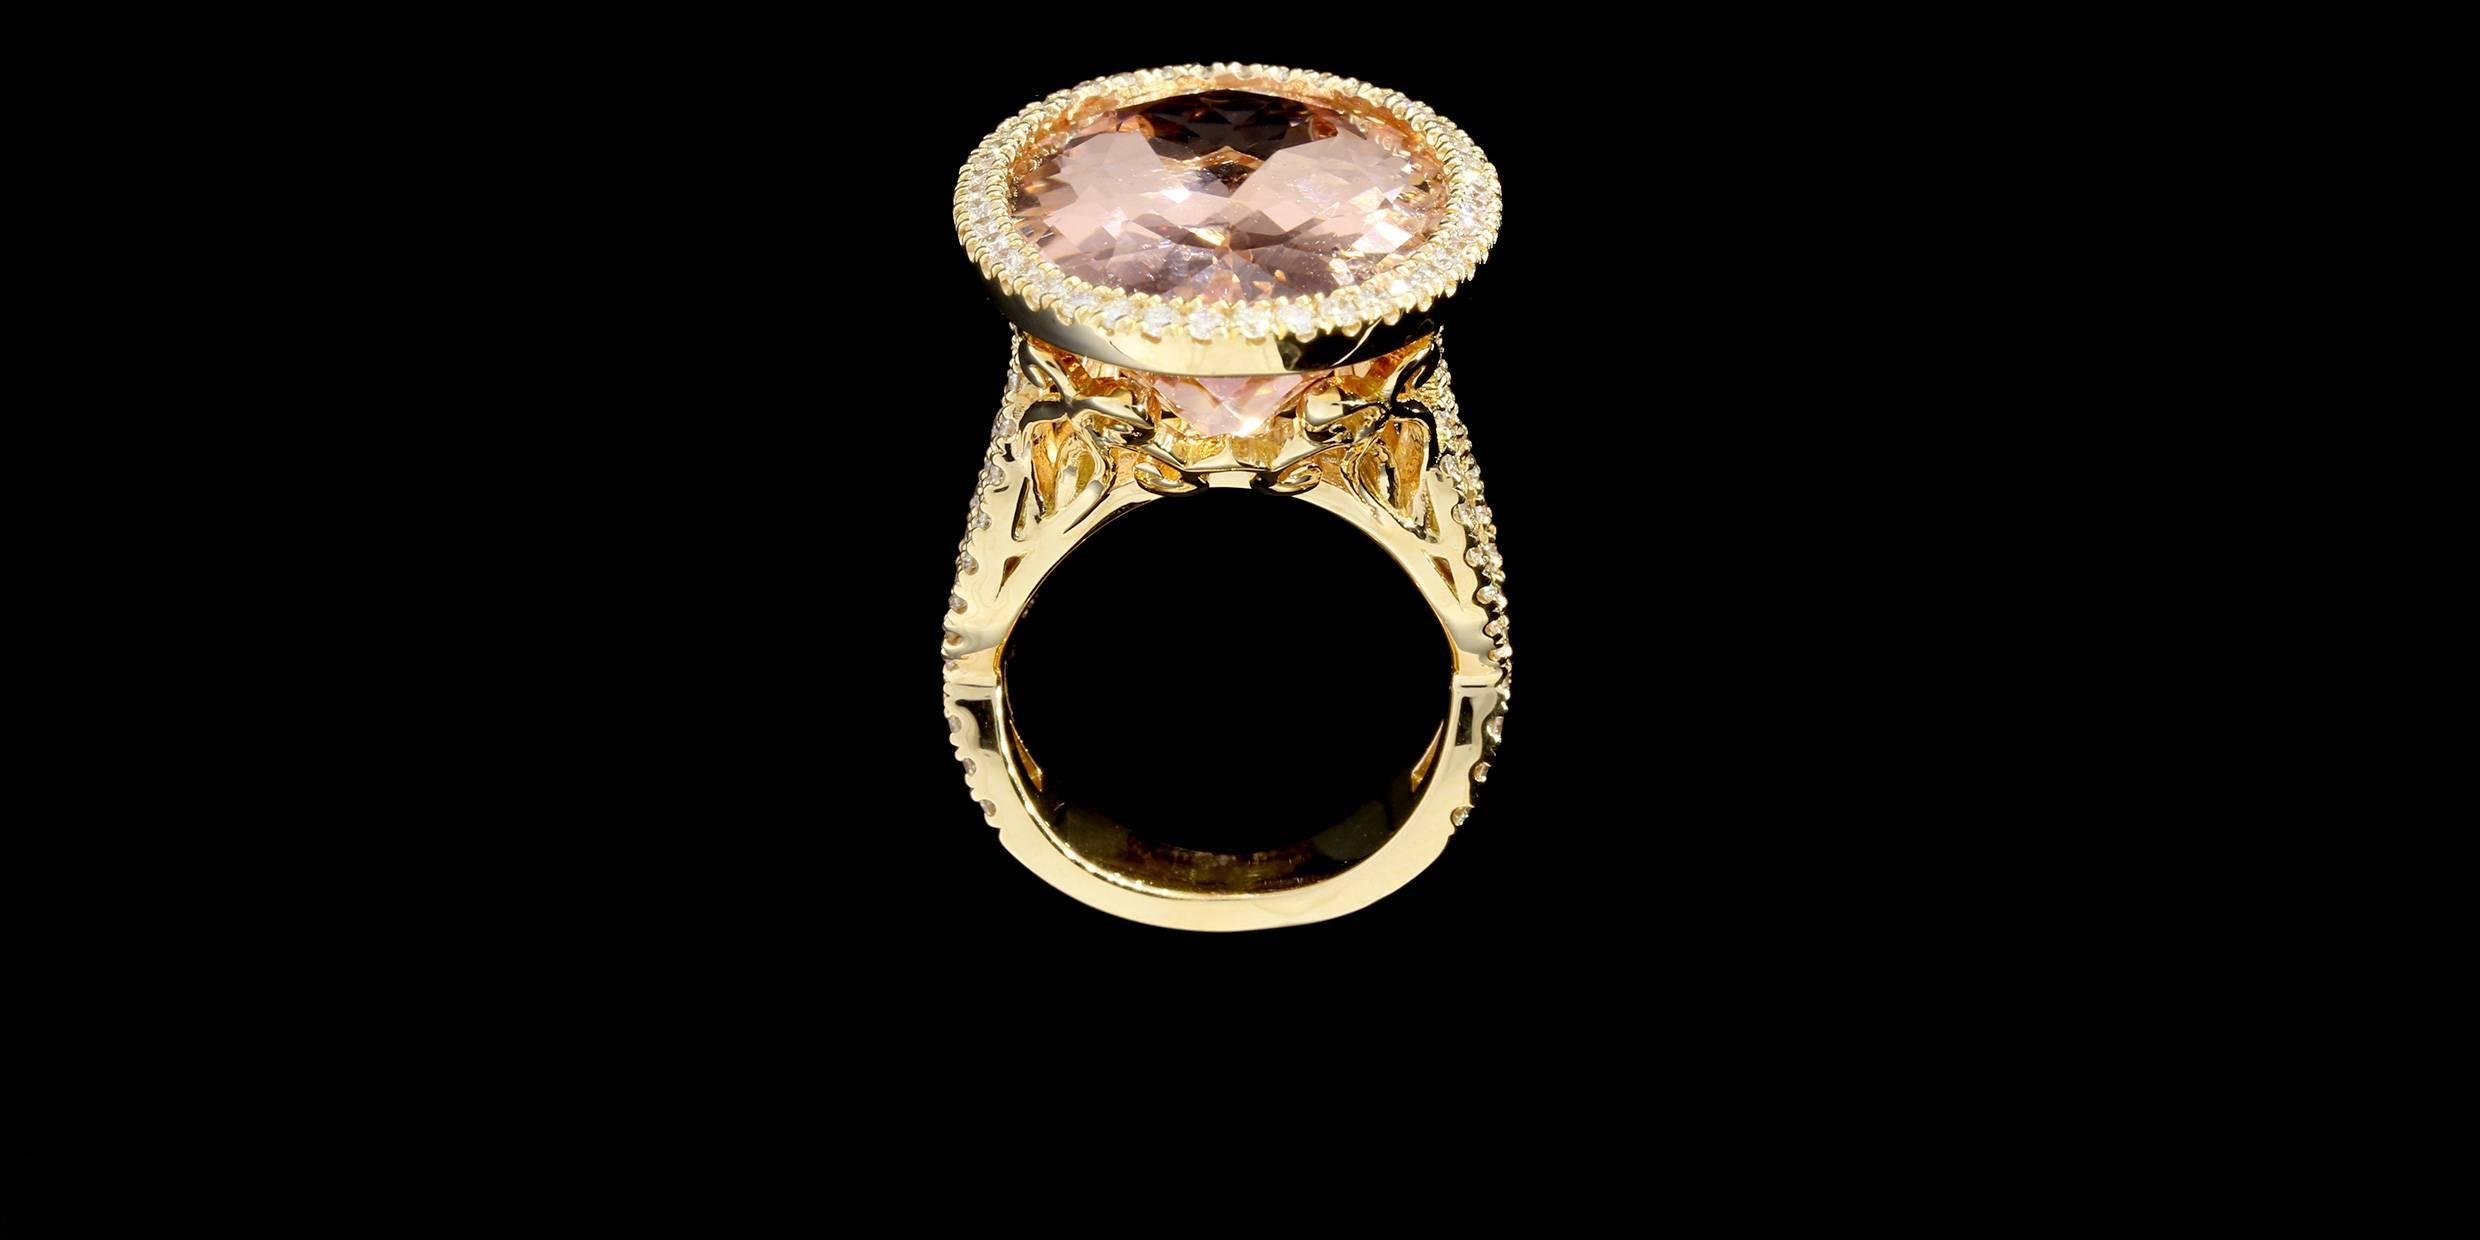 This ring features a 21.00 carat oval shaped Morganite burnish set in a diamond halo.  The ring features 1.39ctw of diamonds with the quality G/SI1 in the halo and shank.  The shank of the ring is a vintage inspired twist shank with an ornate under